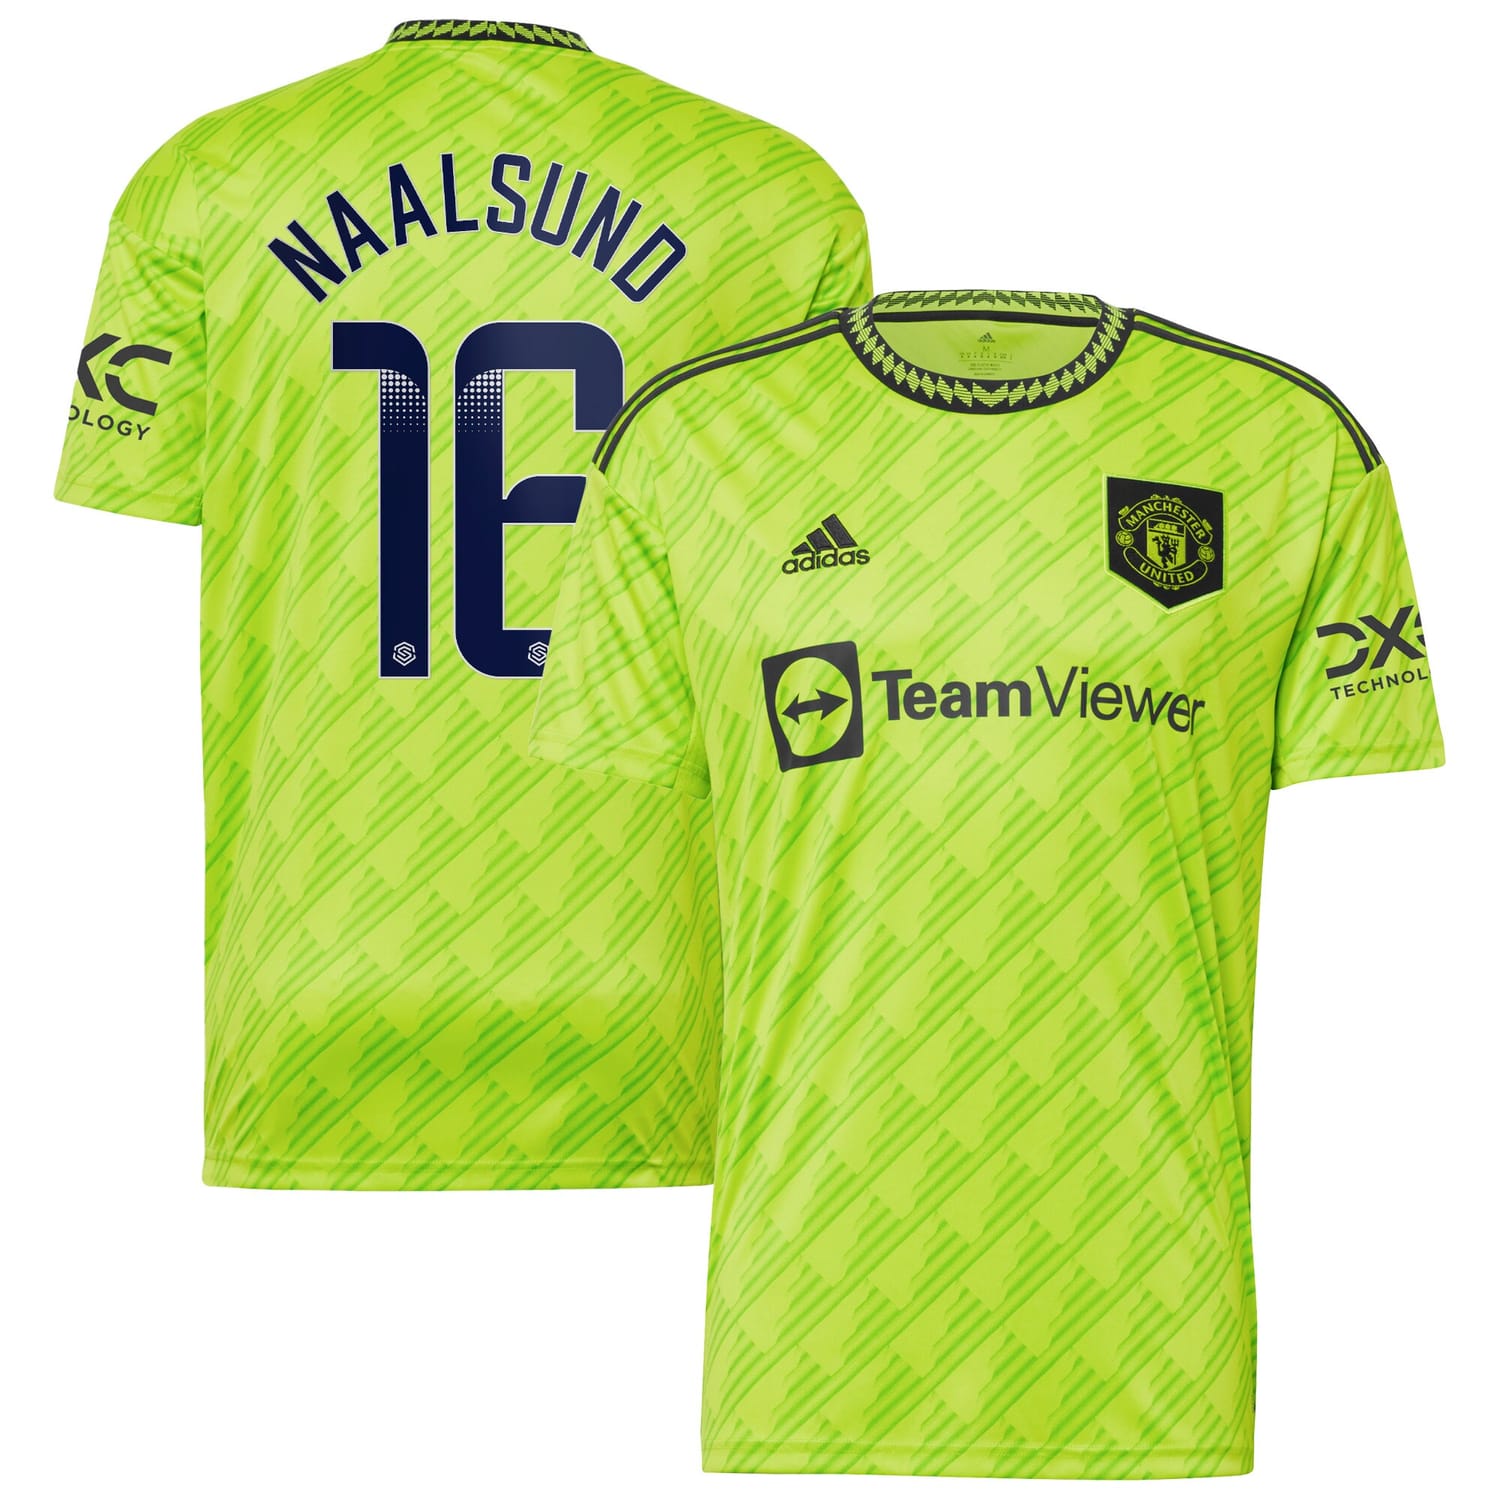 Premier League Manchester United Third WSL Authentic Jersey Shirt 2022-23 player Lisa Naalsund 16 printing for Men